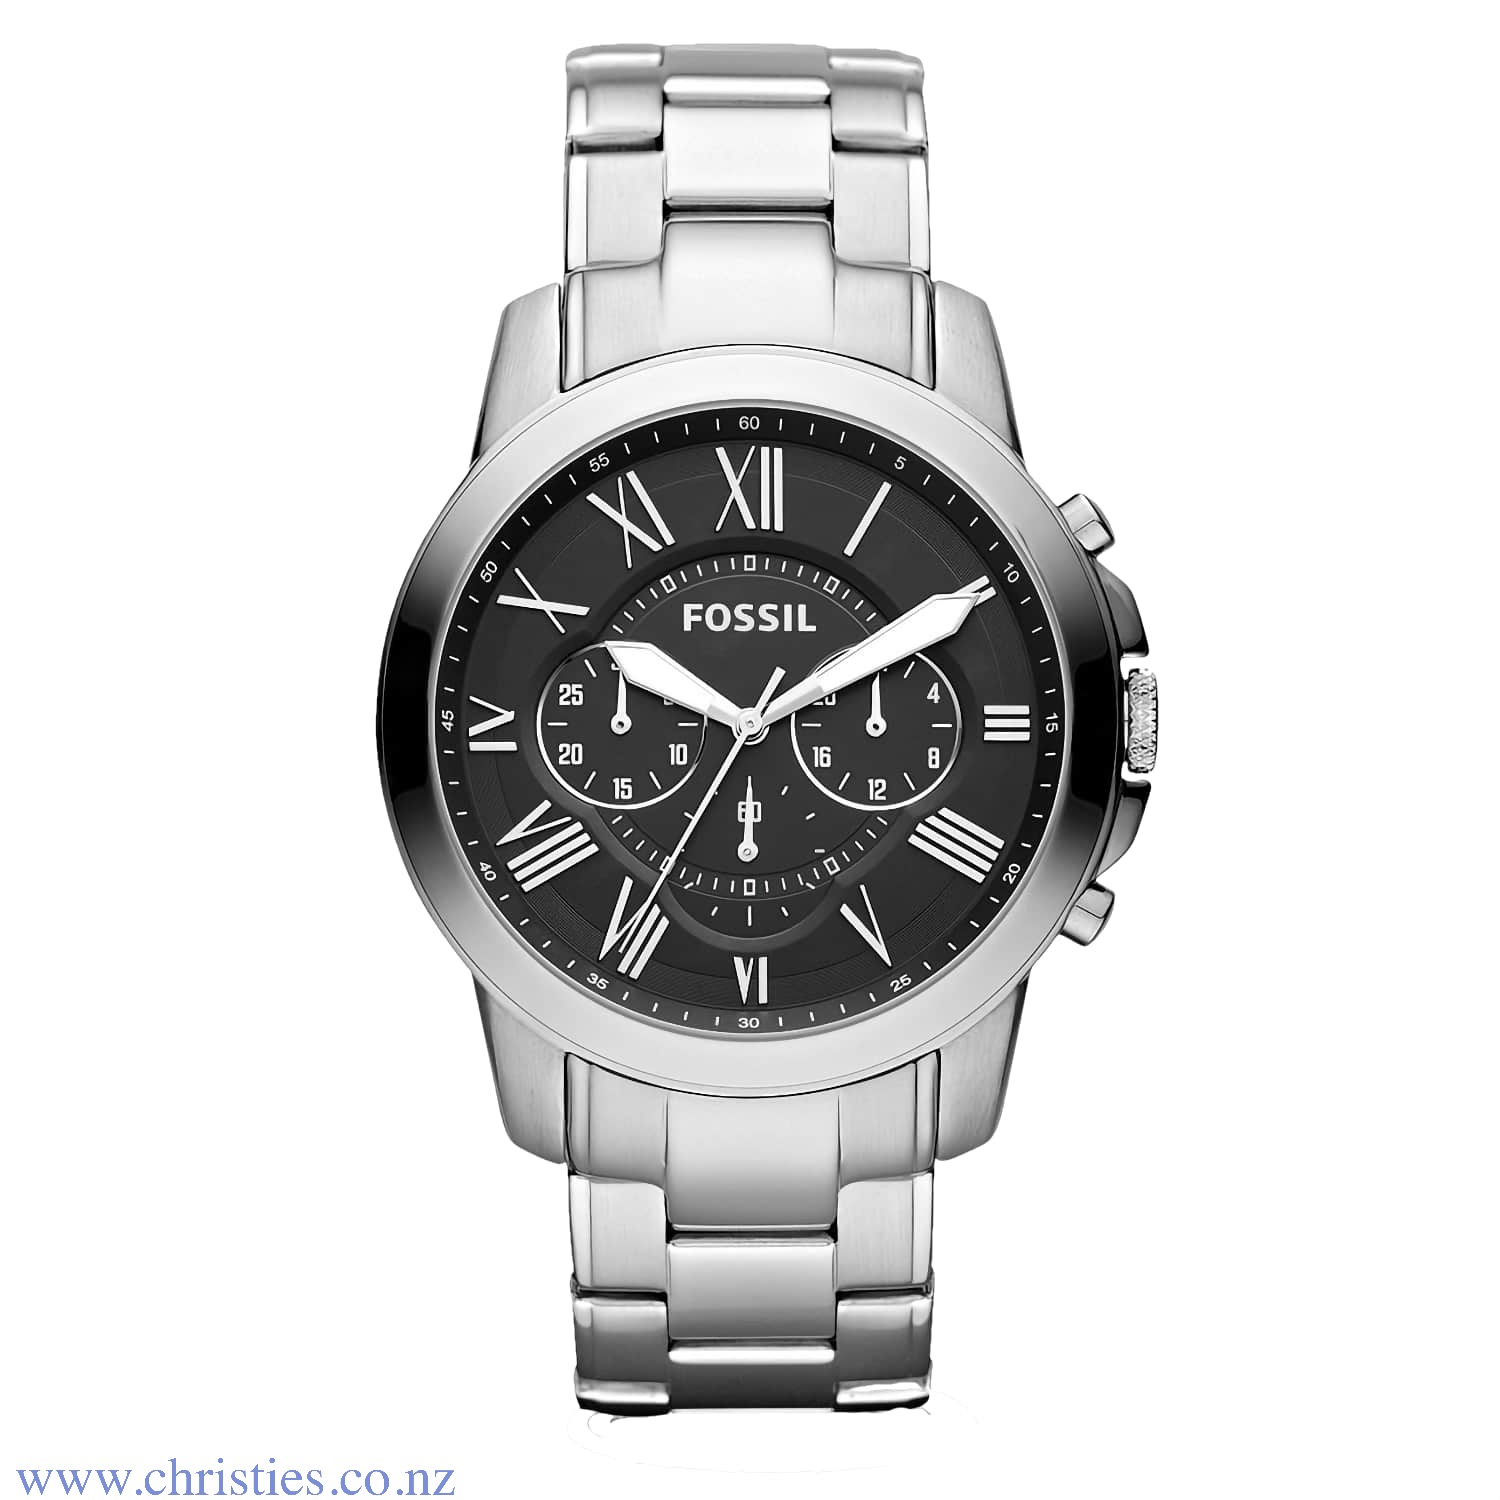 FS4736IE Fossil Grant Chronograph Stainless Steel Watch. FS4736IE Fossil Grant Chronograph Stainless Steel Watch 50 Metres Water Reistant Humm -Buy Little things up to $1000 and choose 10 weekly or 5 fortnightly payments with no interest. Late payment fee